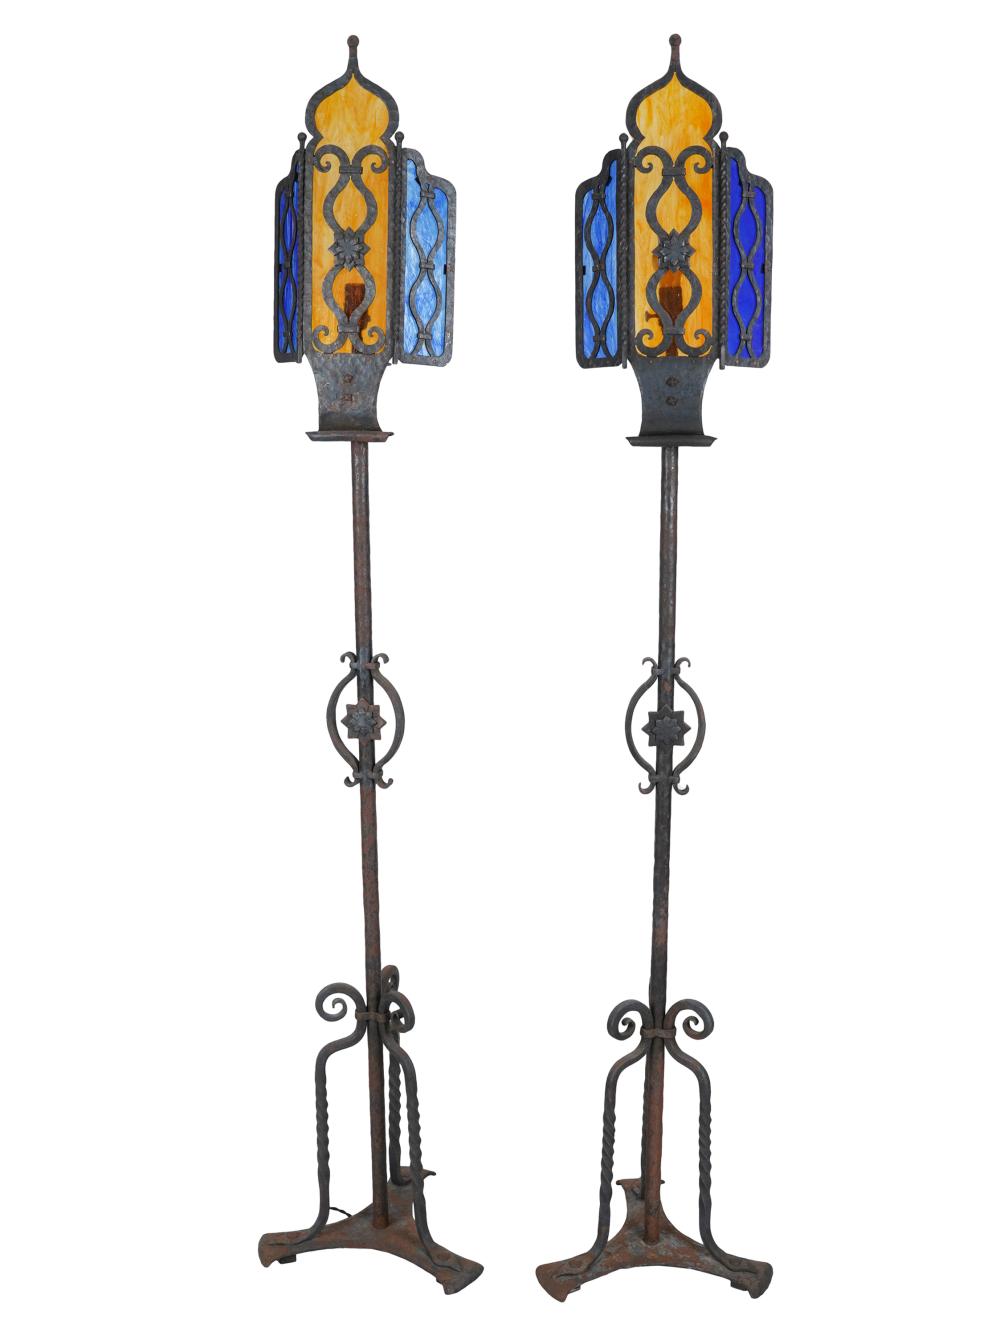 PAIR OF SPANISH REVIVAL STYLE IRON